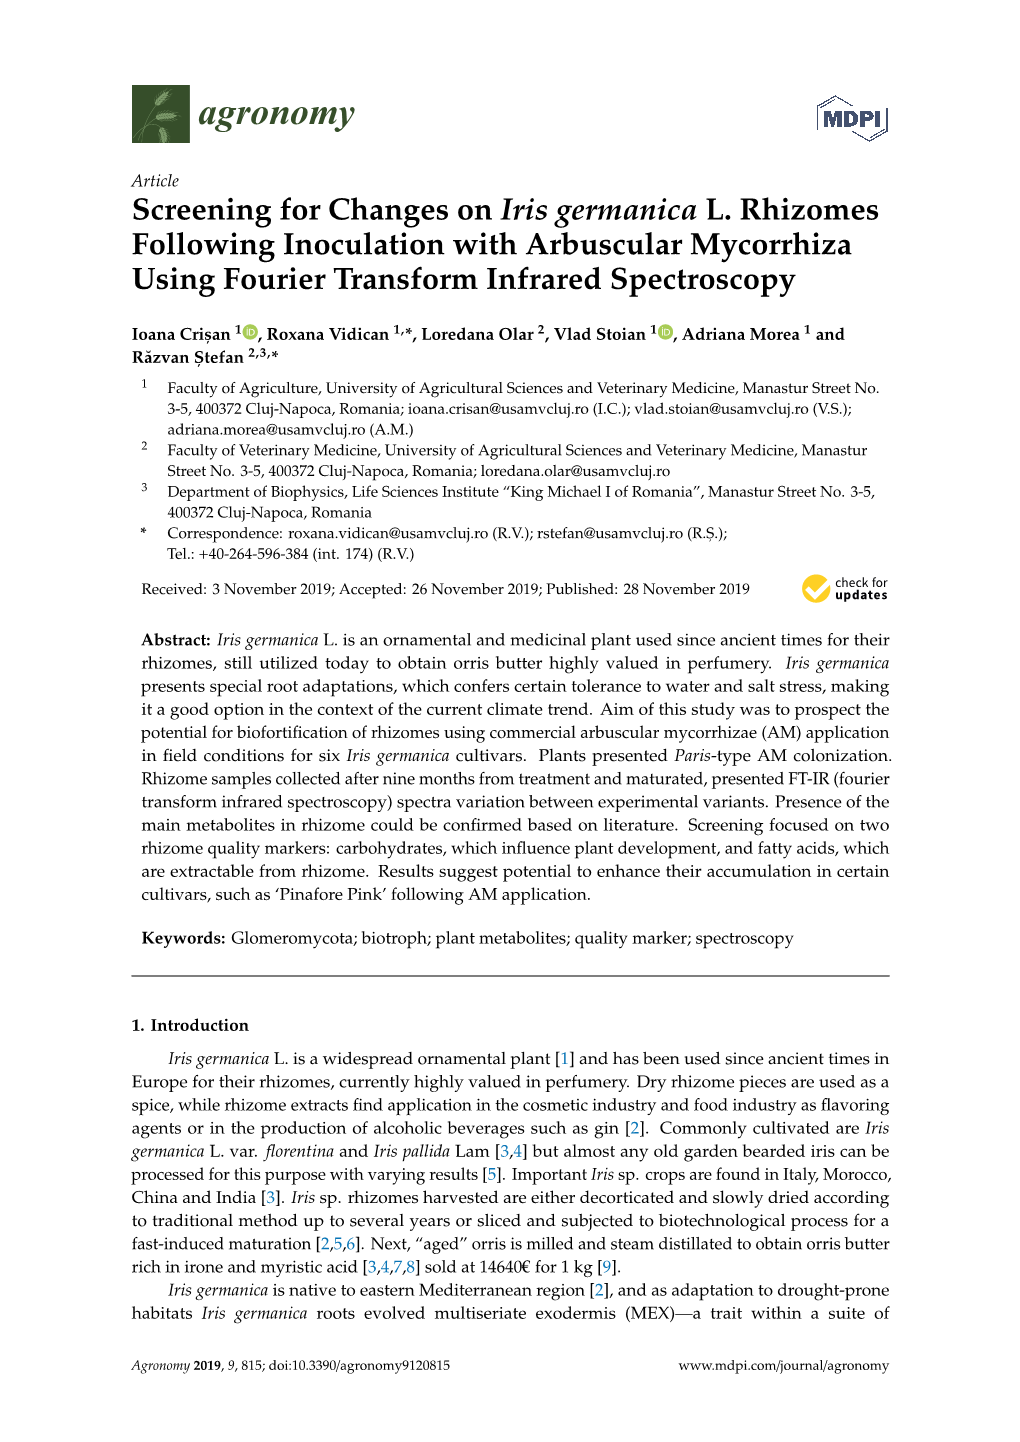 Screening for Changes on Iris Germanica L. Rhizomes Following Inoculation with Arbuscular Mycorrhiza Using Fourier Transform Infrared Spectroscopy